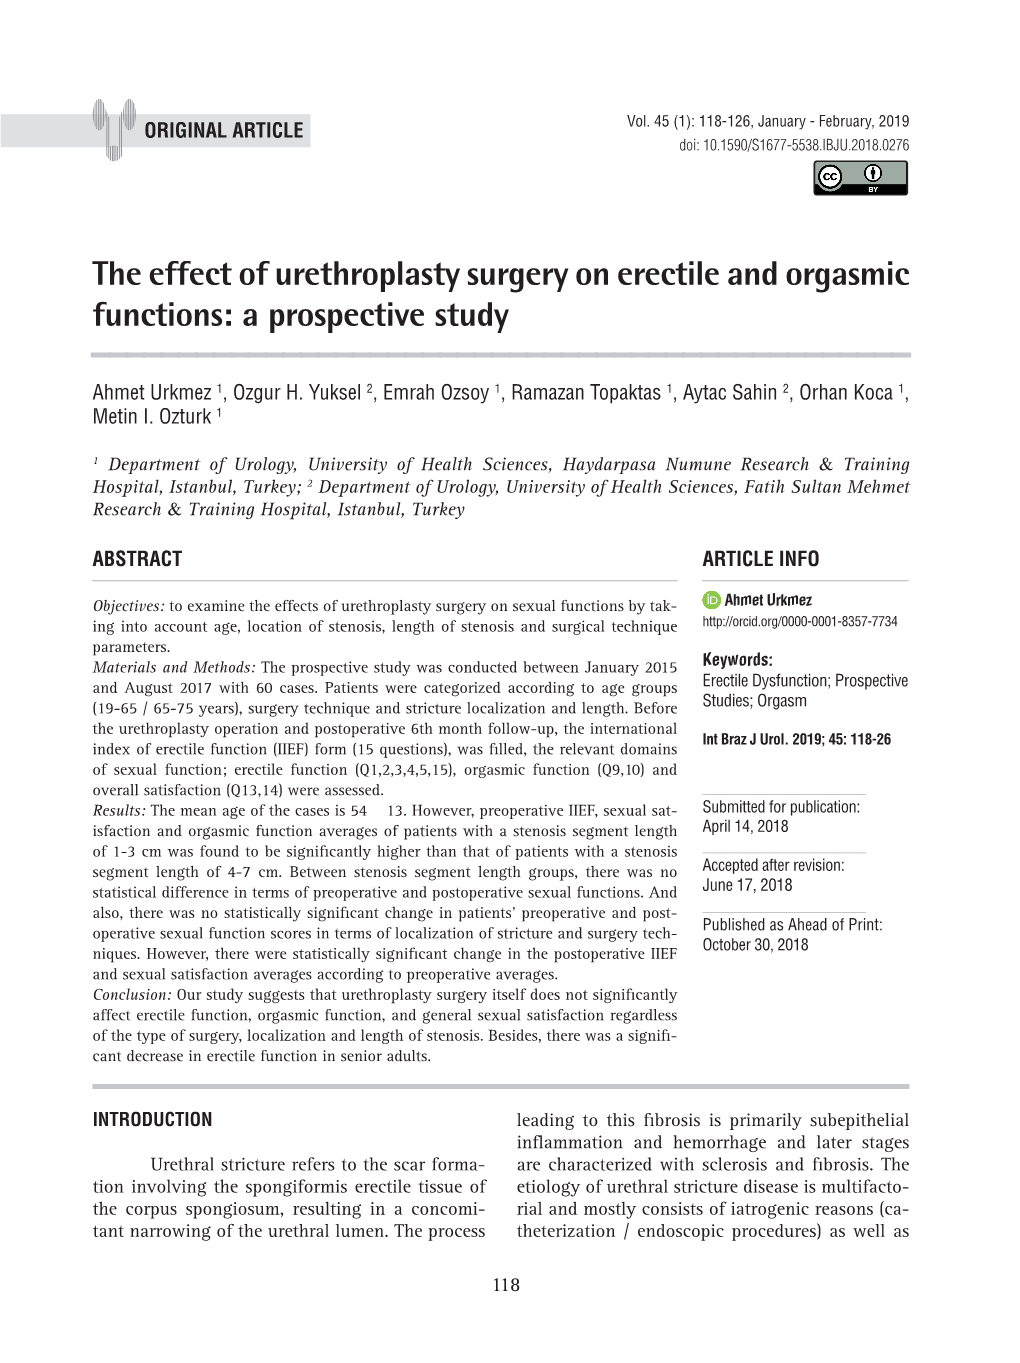 The Effect of Urethroplasty Surgery on Erectile and Orgasmic Functions: a Prospective Study ______